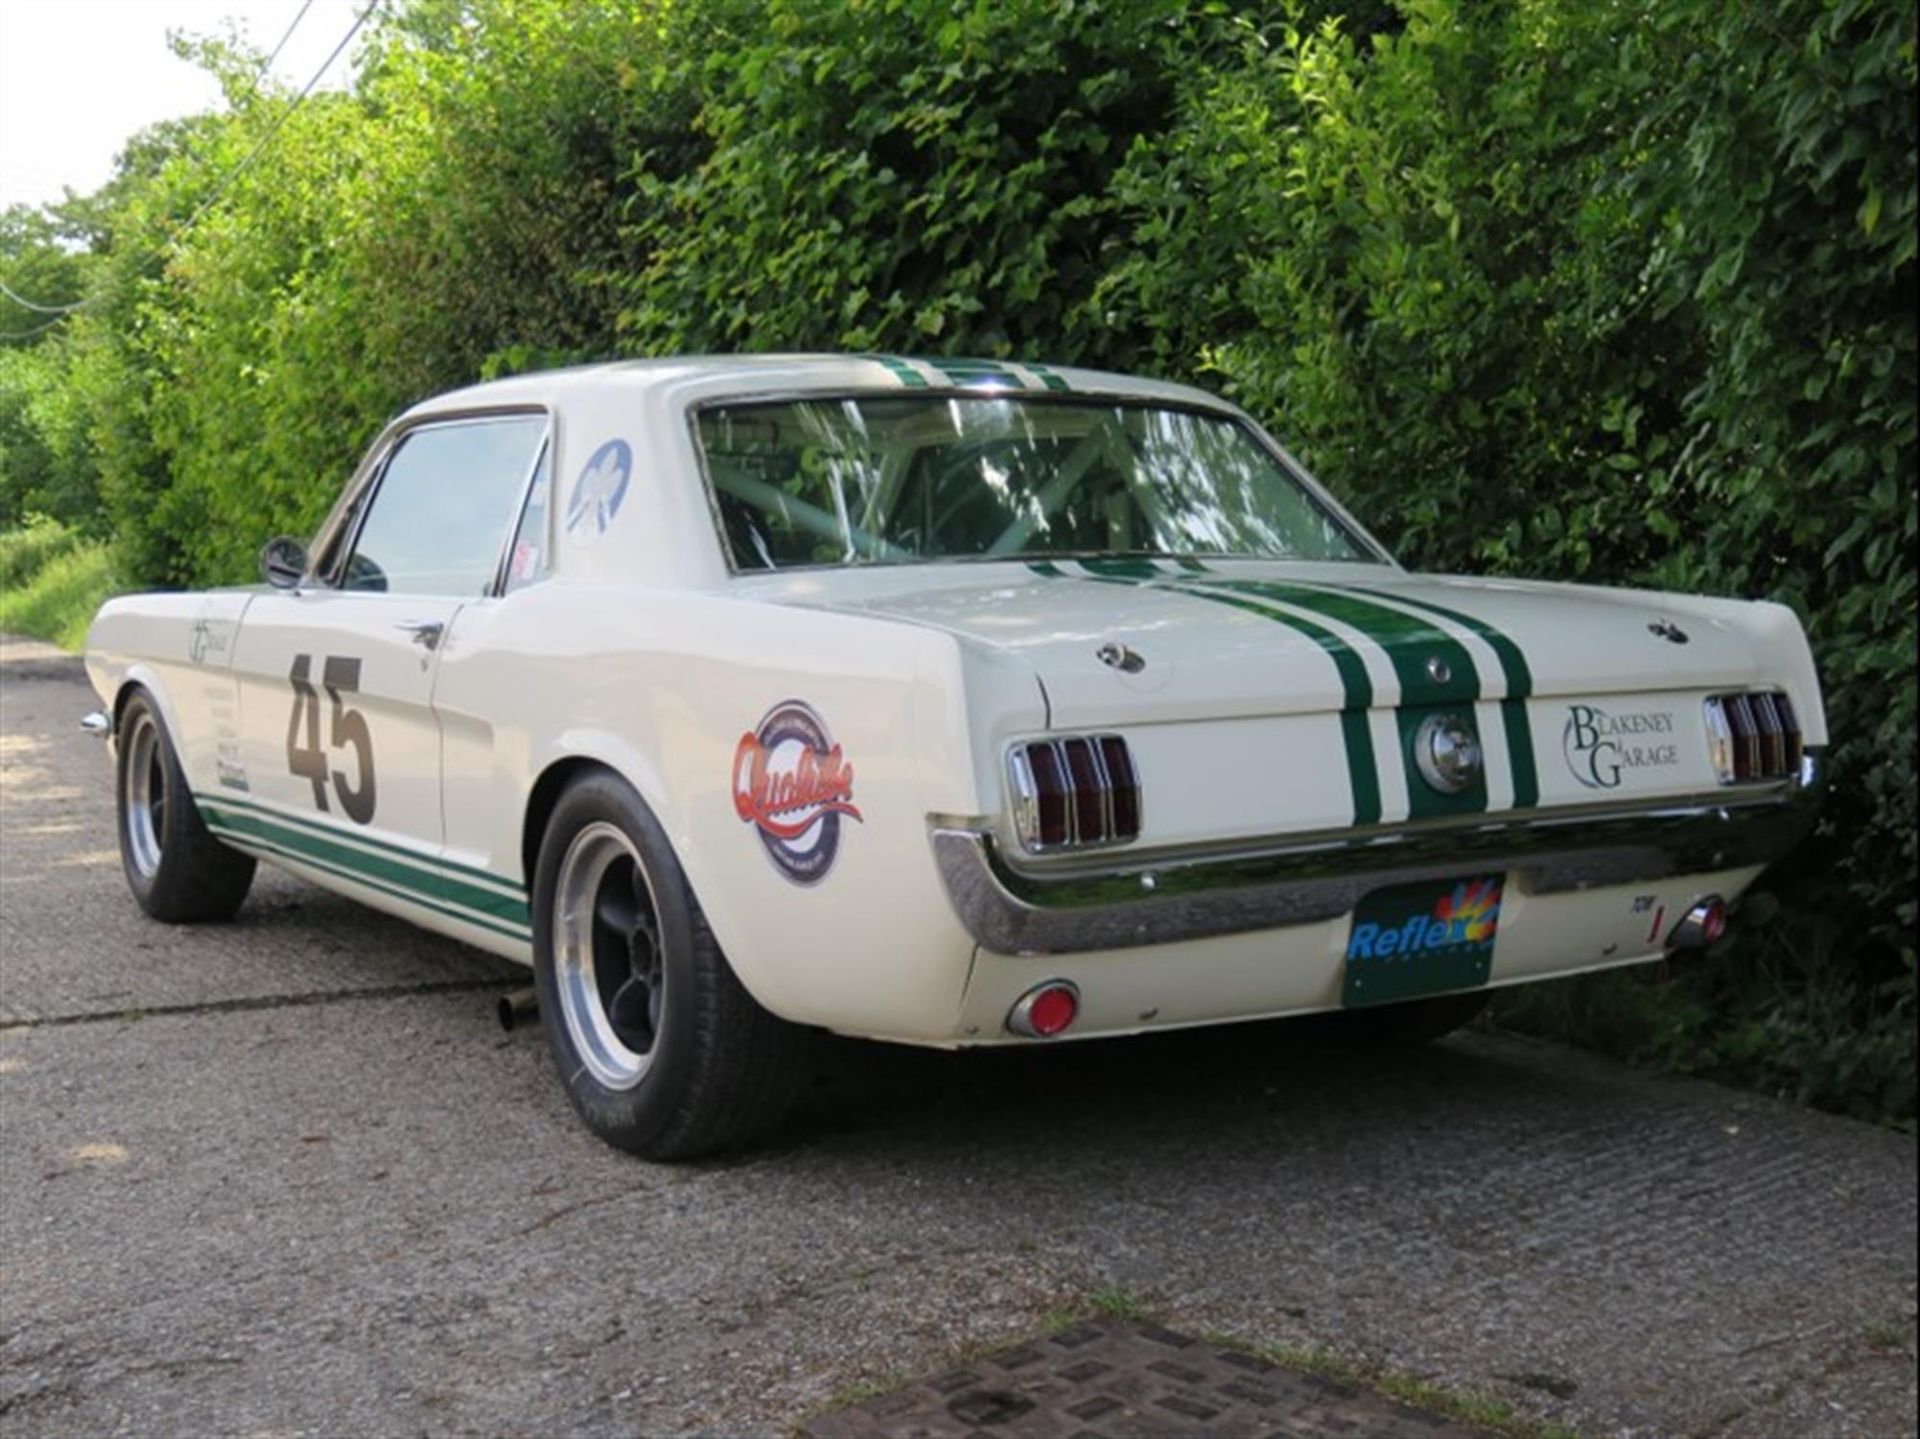 1965 Ford Mustang FIA 302ci Race Car - Image 7 of 10